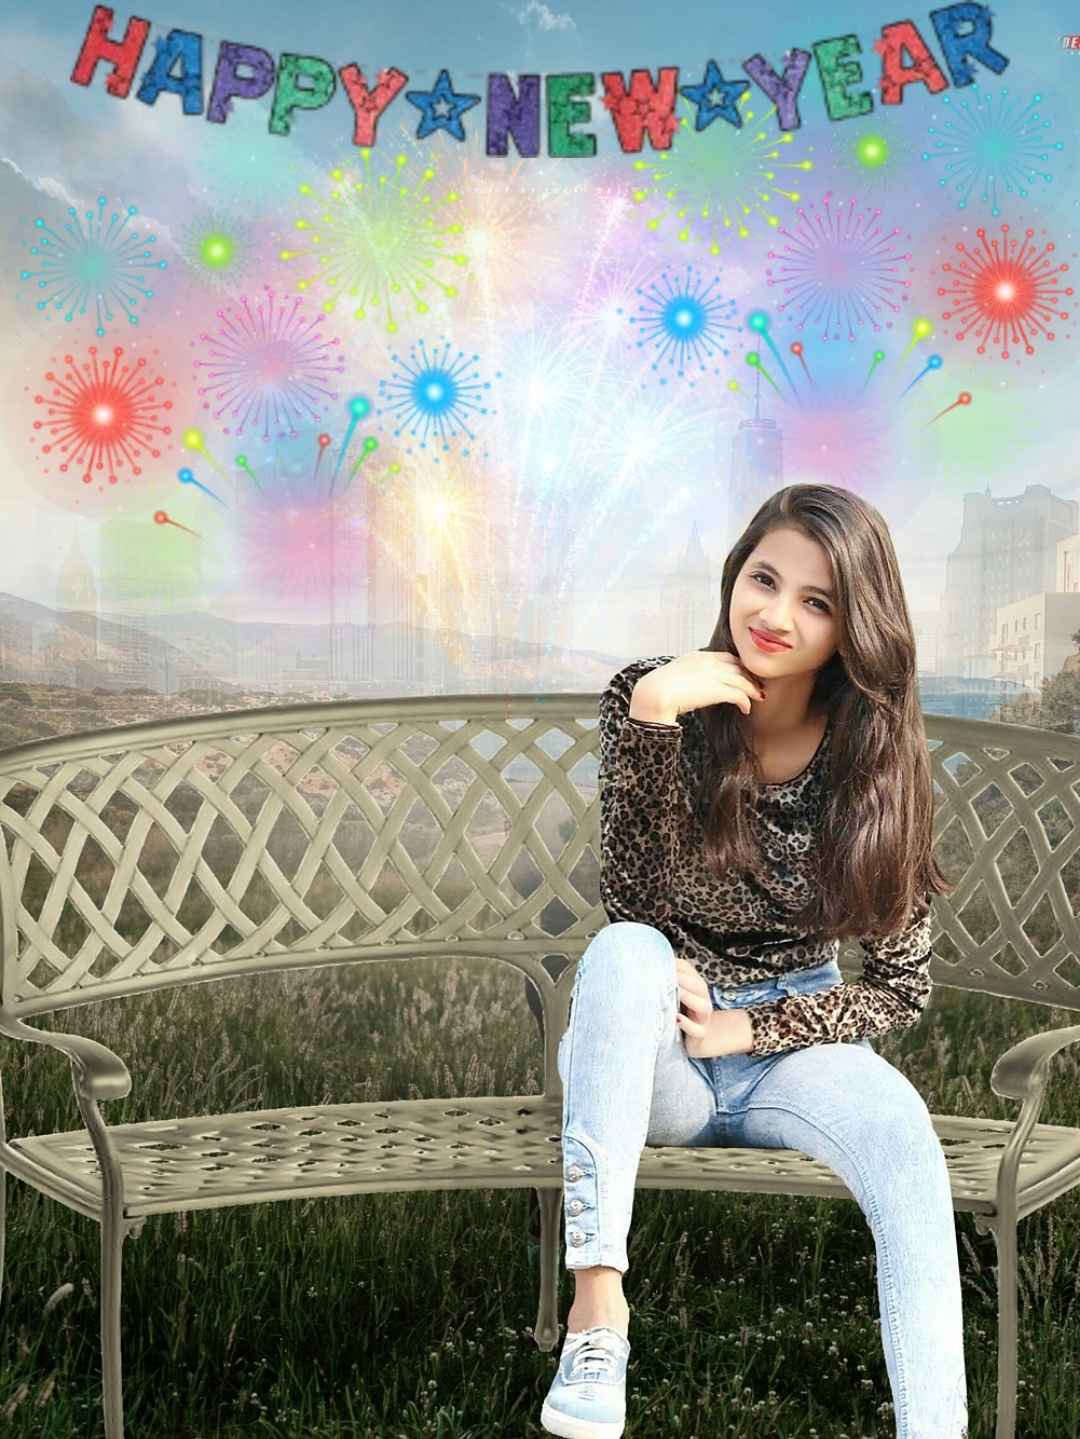 New Year Background HD with Girl